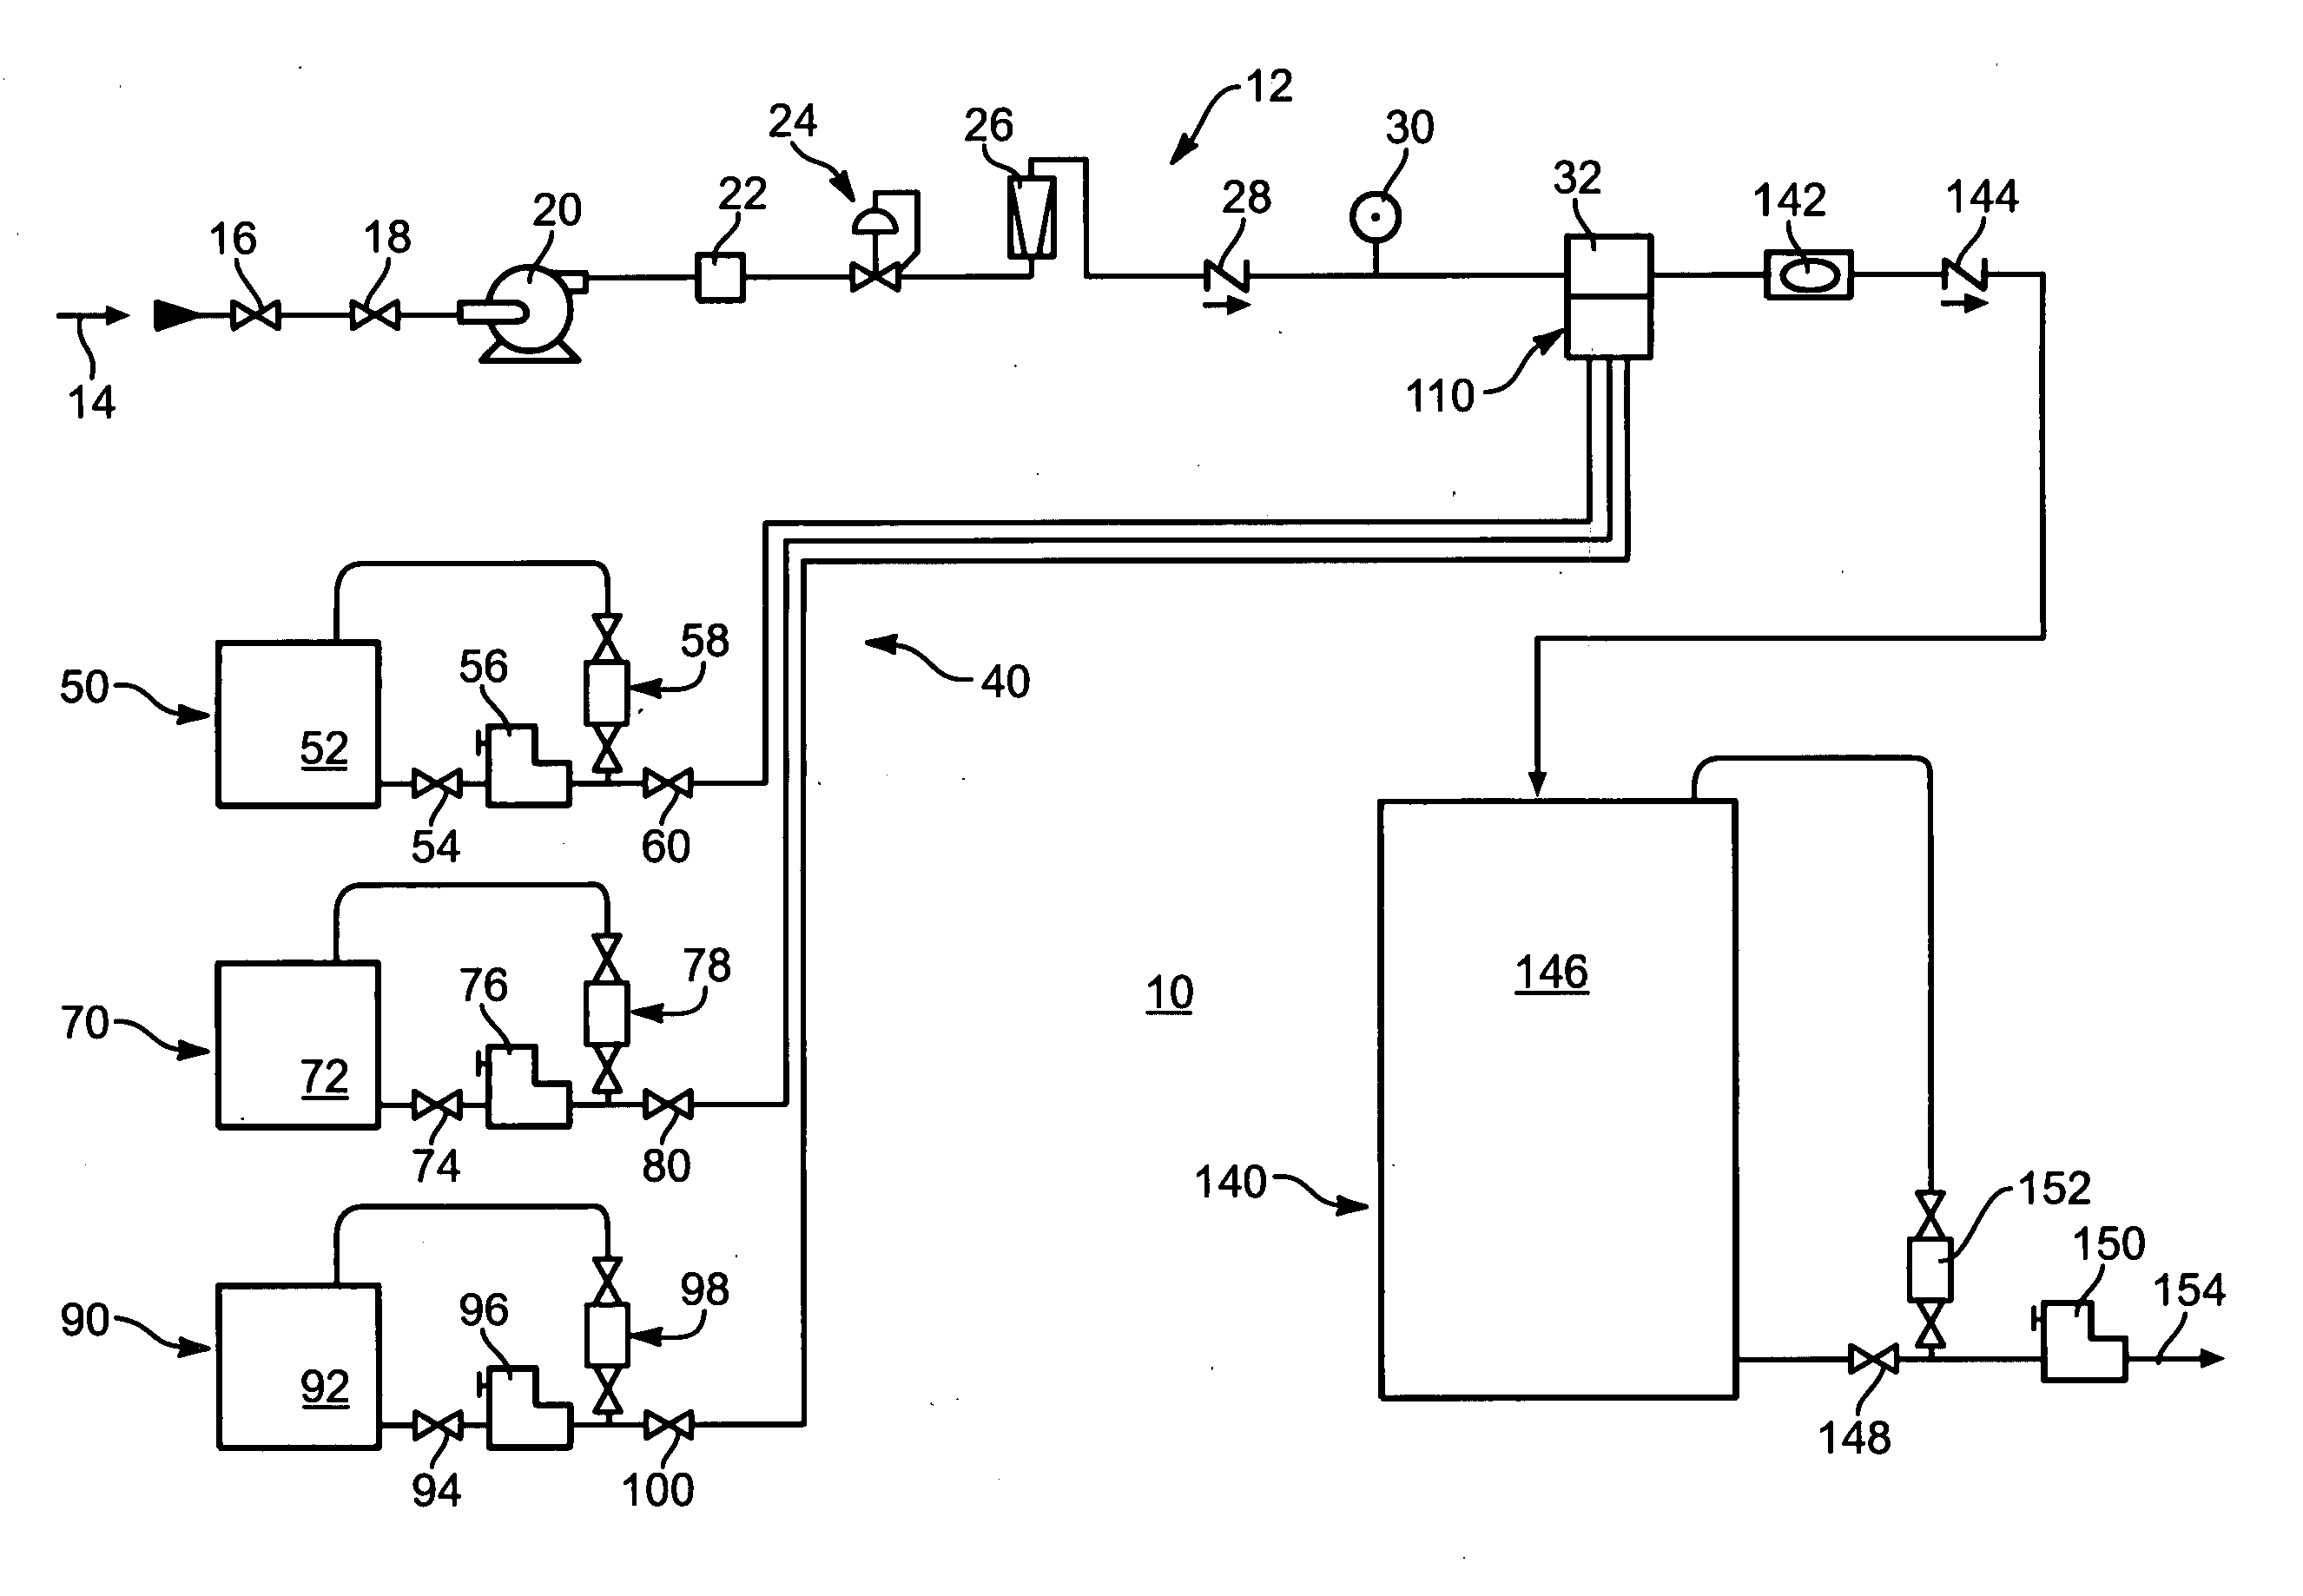 Apparatus and methods for efficient generation of chlorine dioxide